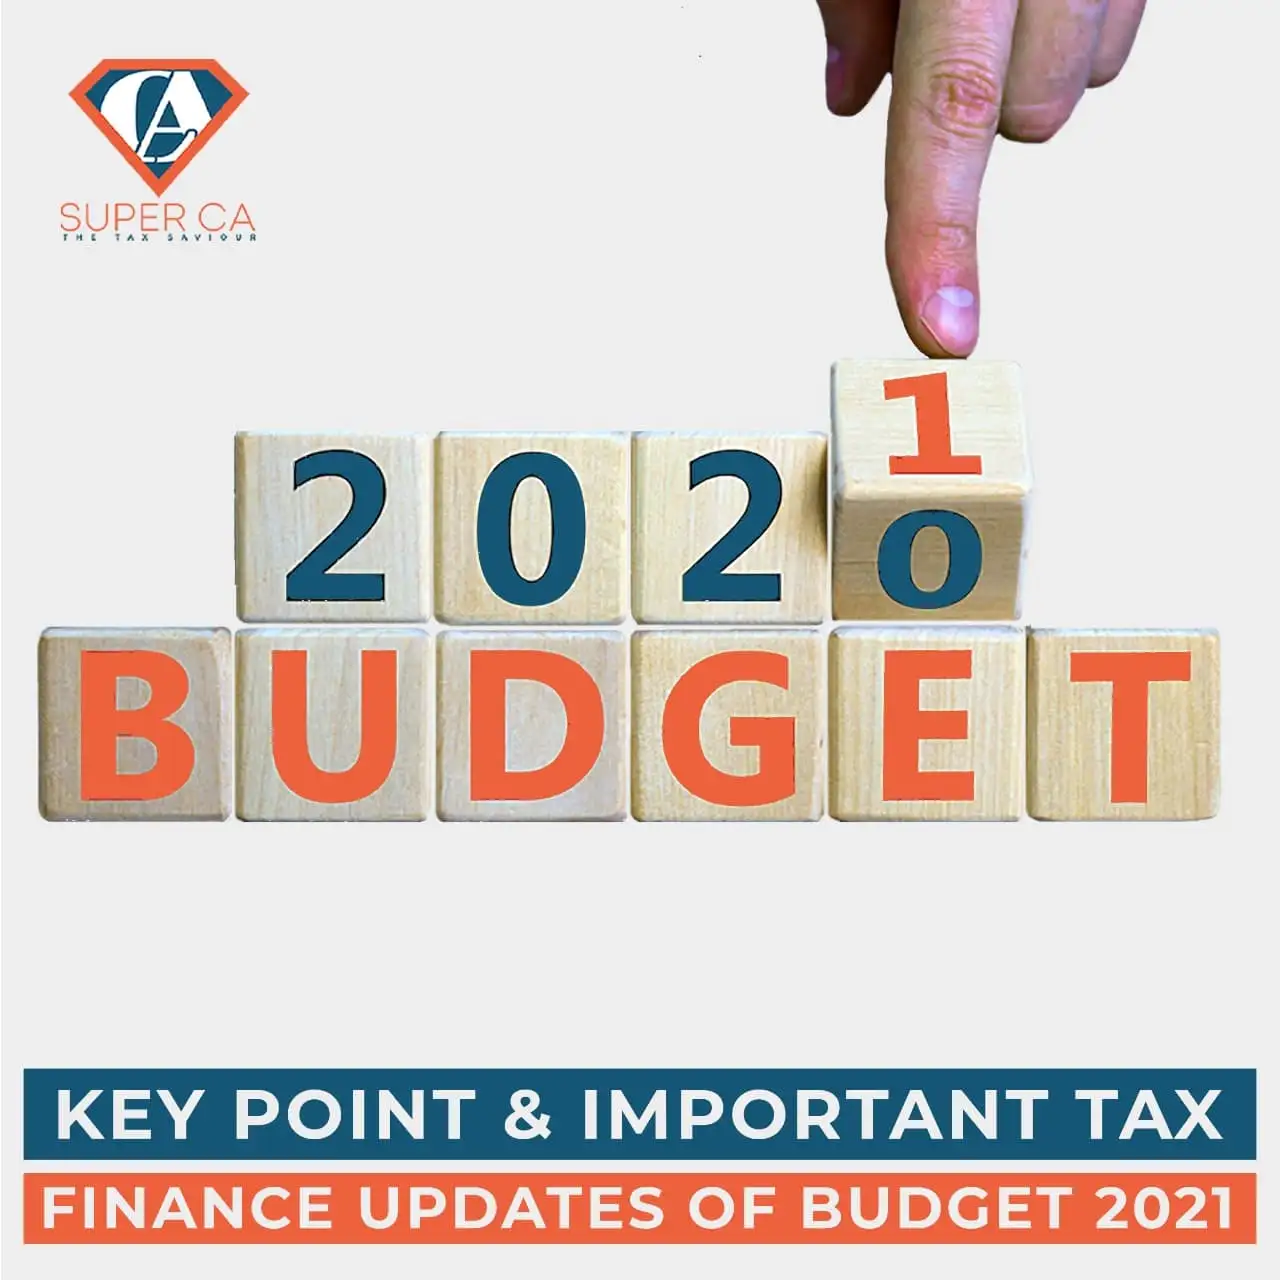 Key points and important Tax/Finance updates of Budget 21